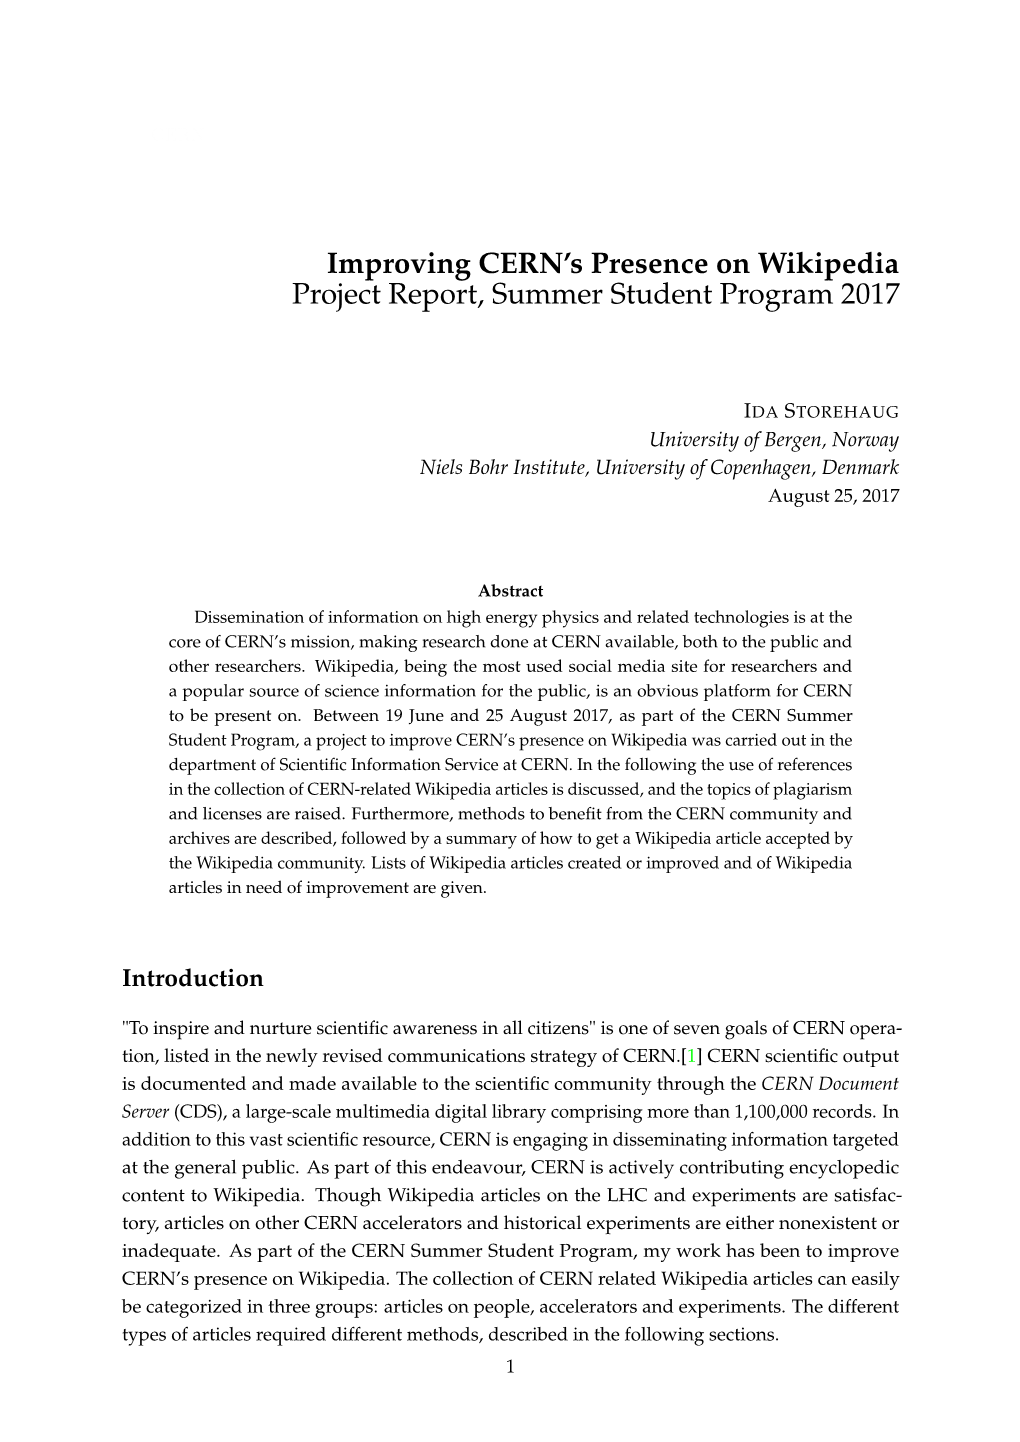 Improving CERN's Presence on Wikipedia Project Report, Summer